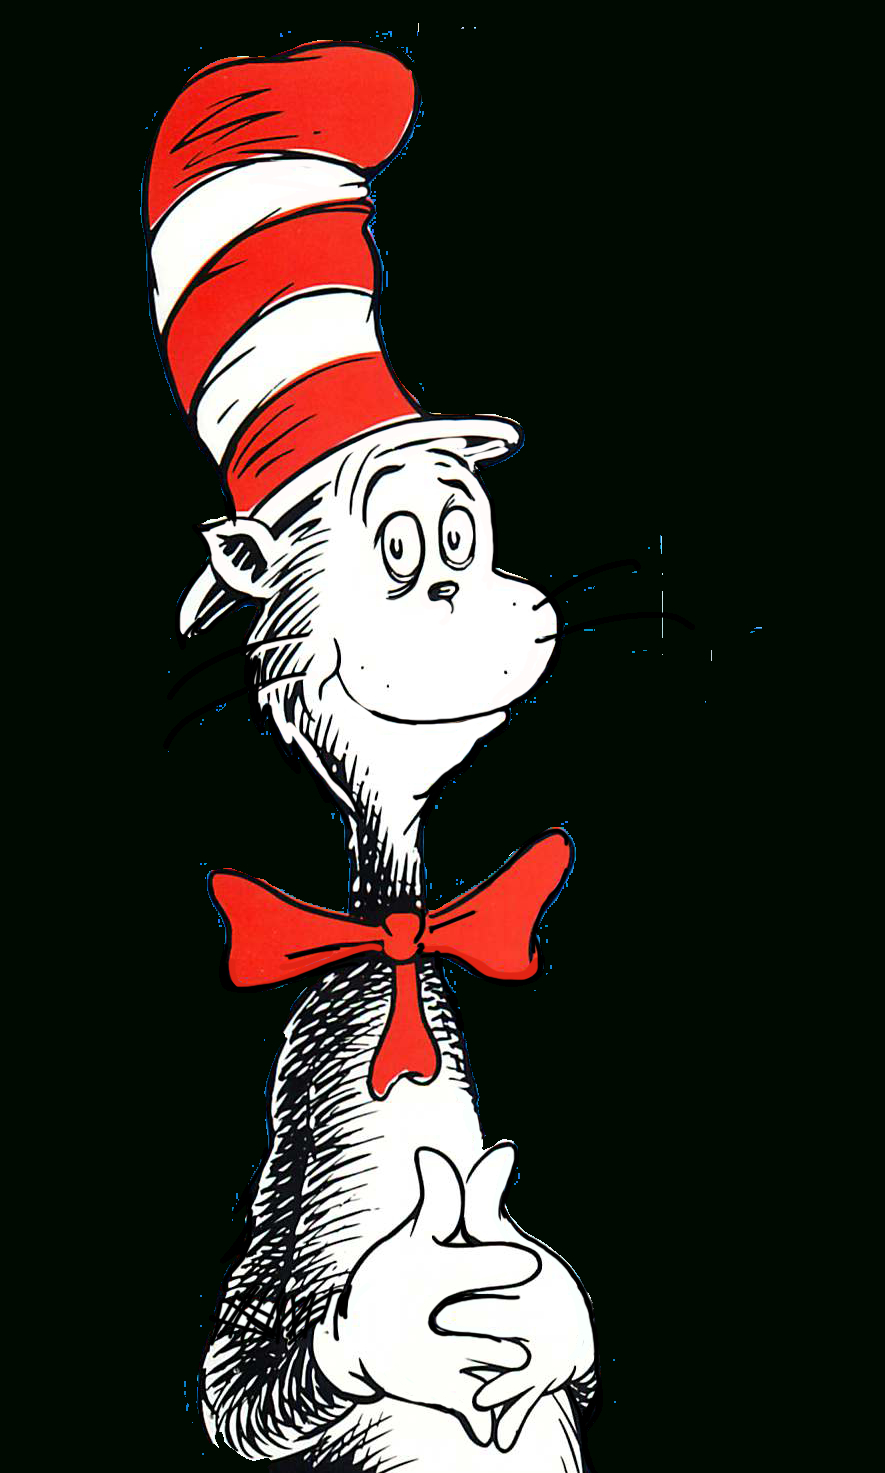 Pictures Of Dr Seuss Characters | Free Download Best Pictures Of Dr - Free Printable Dr Seuss Characters